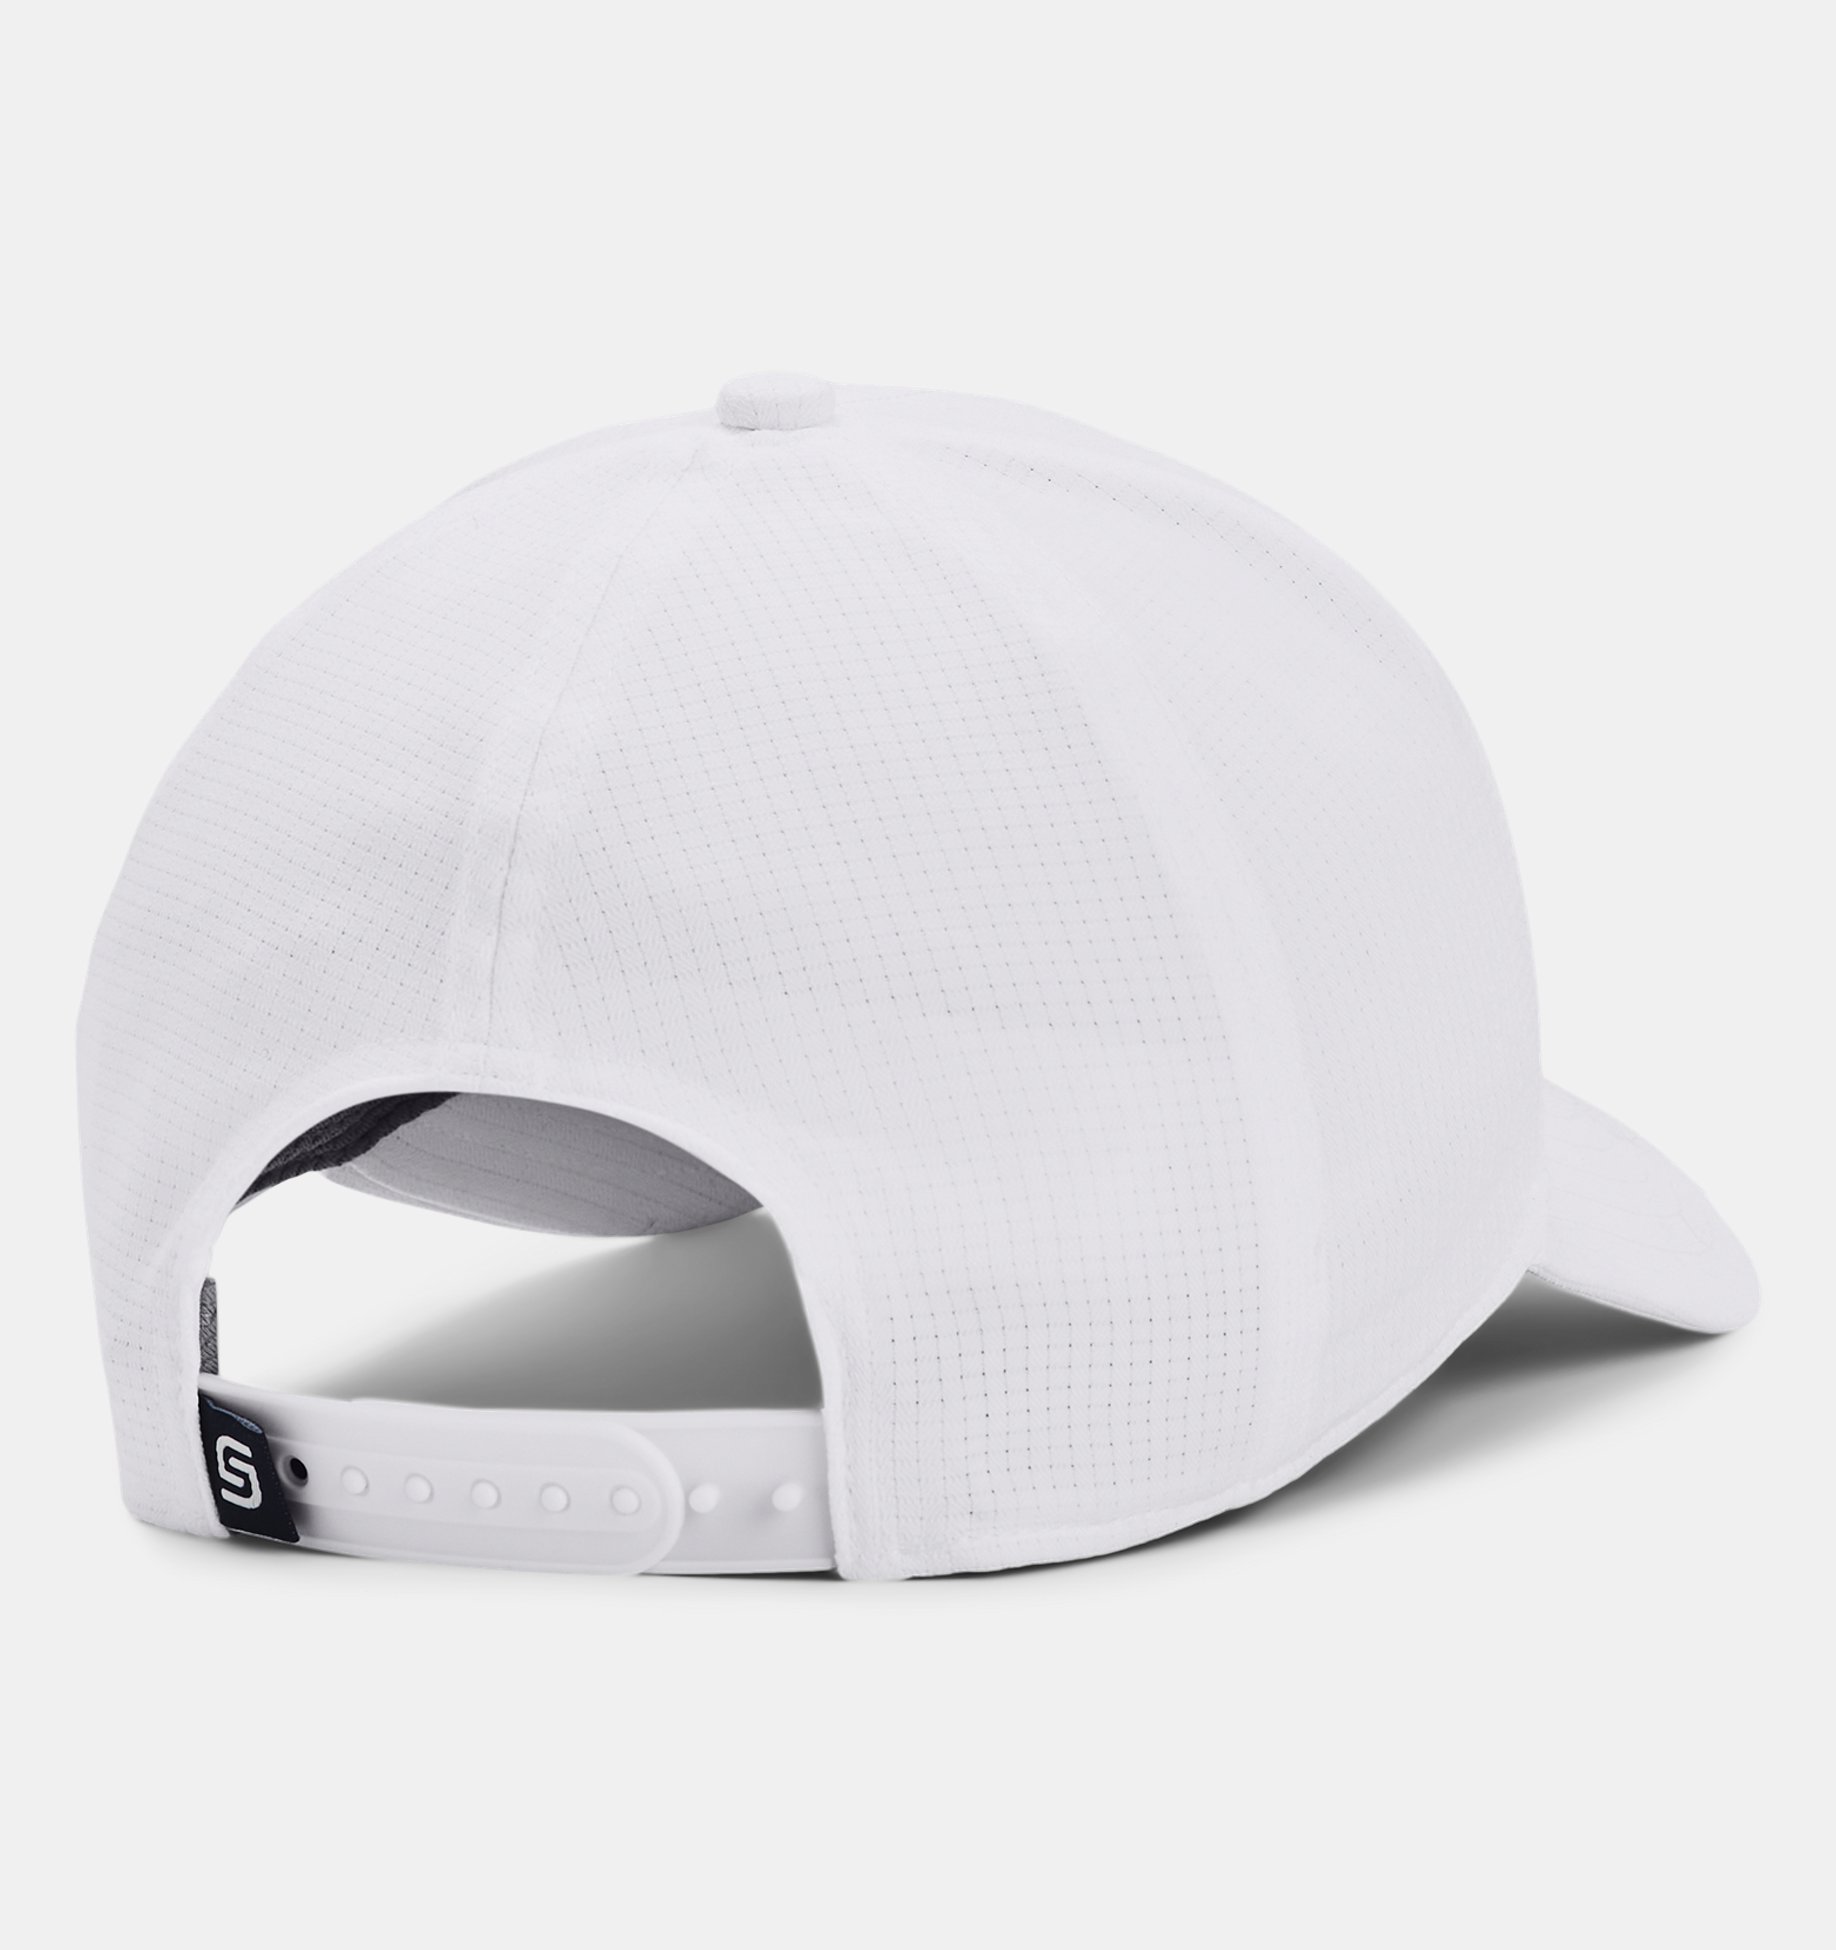 https://underarmour.scene7.com/is/image/Underarmour/1361544-103_SLB_SL?rp=standard-0pad|pdpZoomDesktop&scl=0.85&fmt=jpg&qlt=85&resMode=sharp2&cache=on,on&bgc=f0f0f0&wid=1836&hei=1950&size=1500,1500